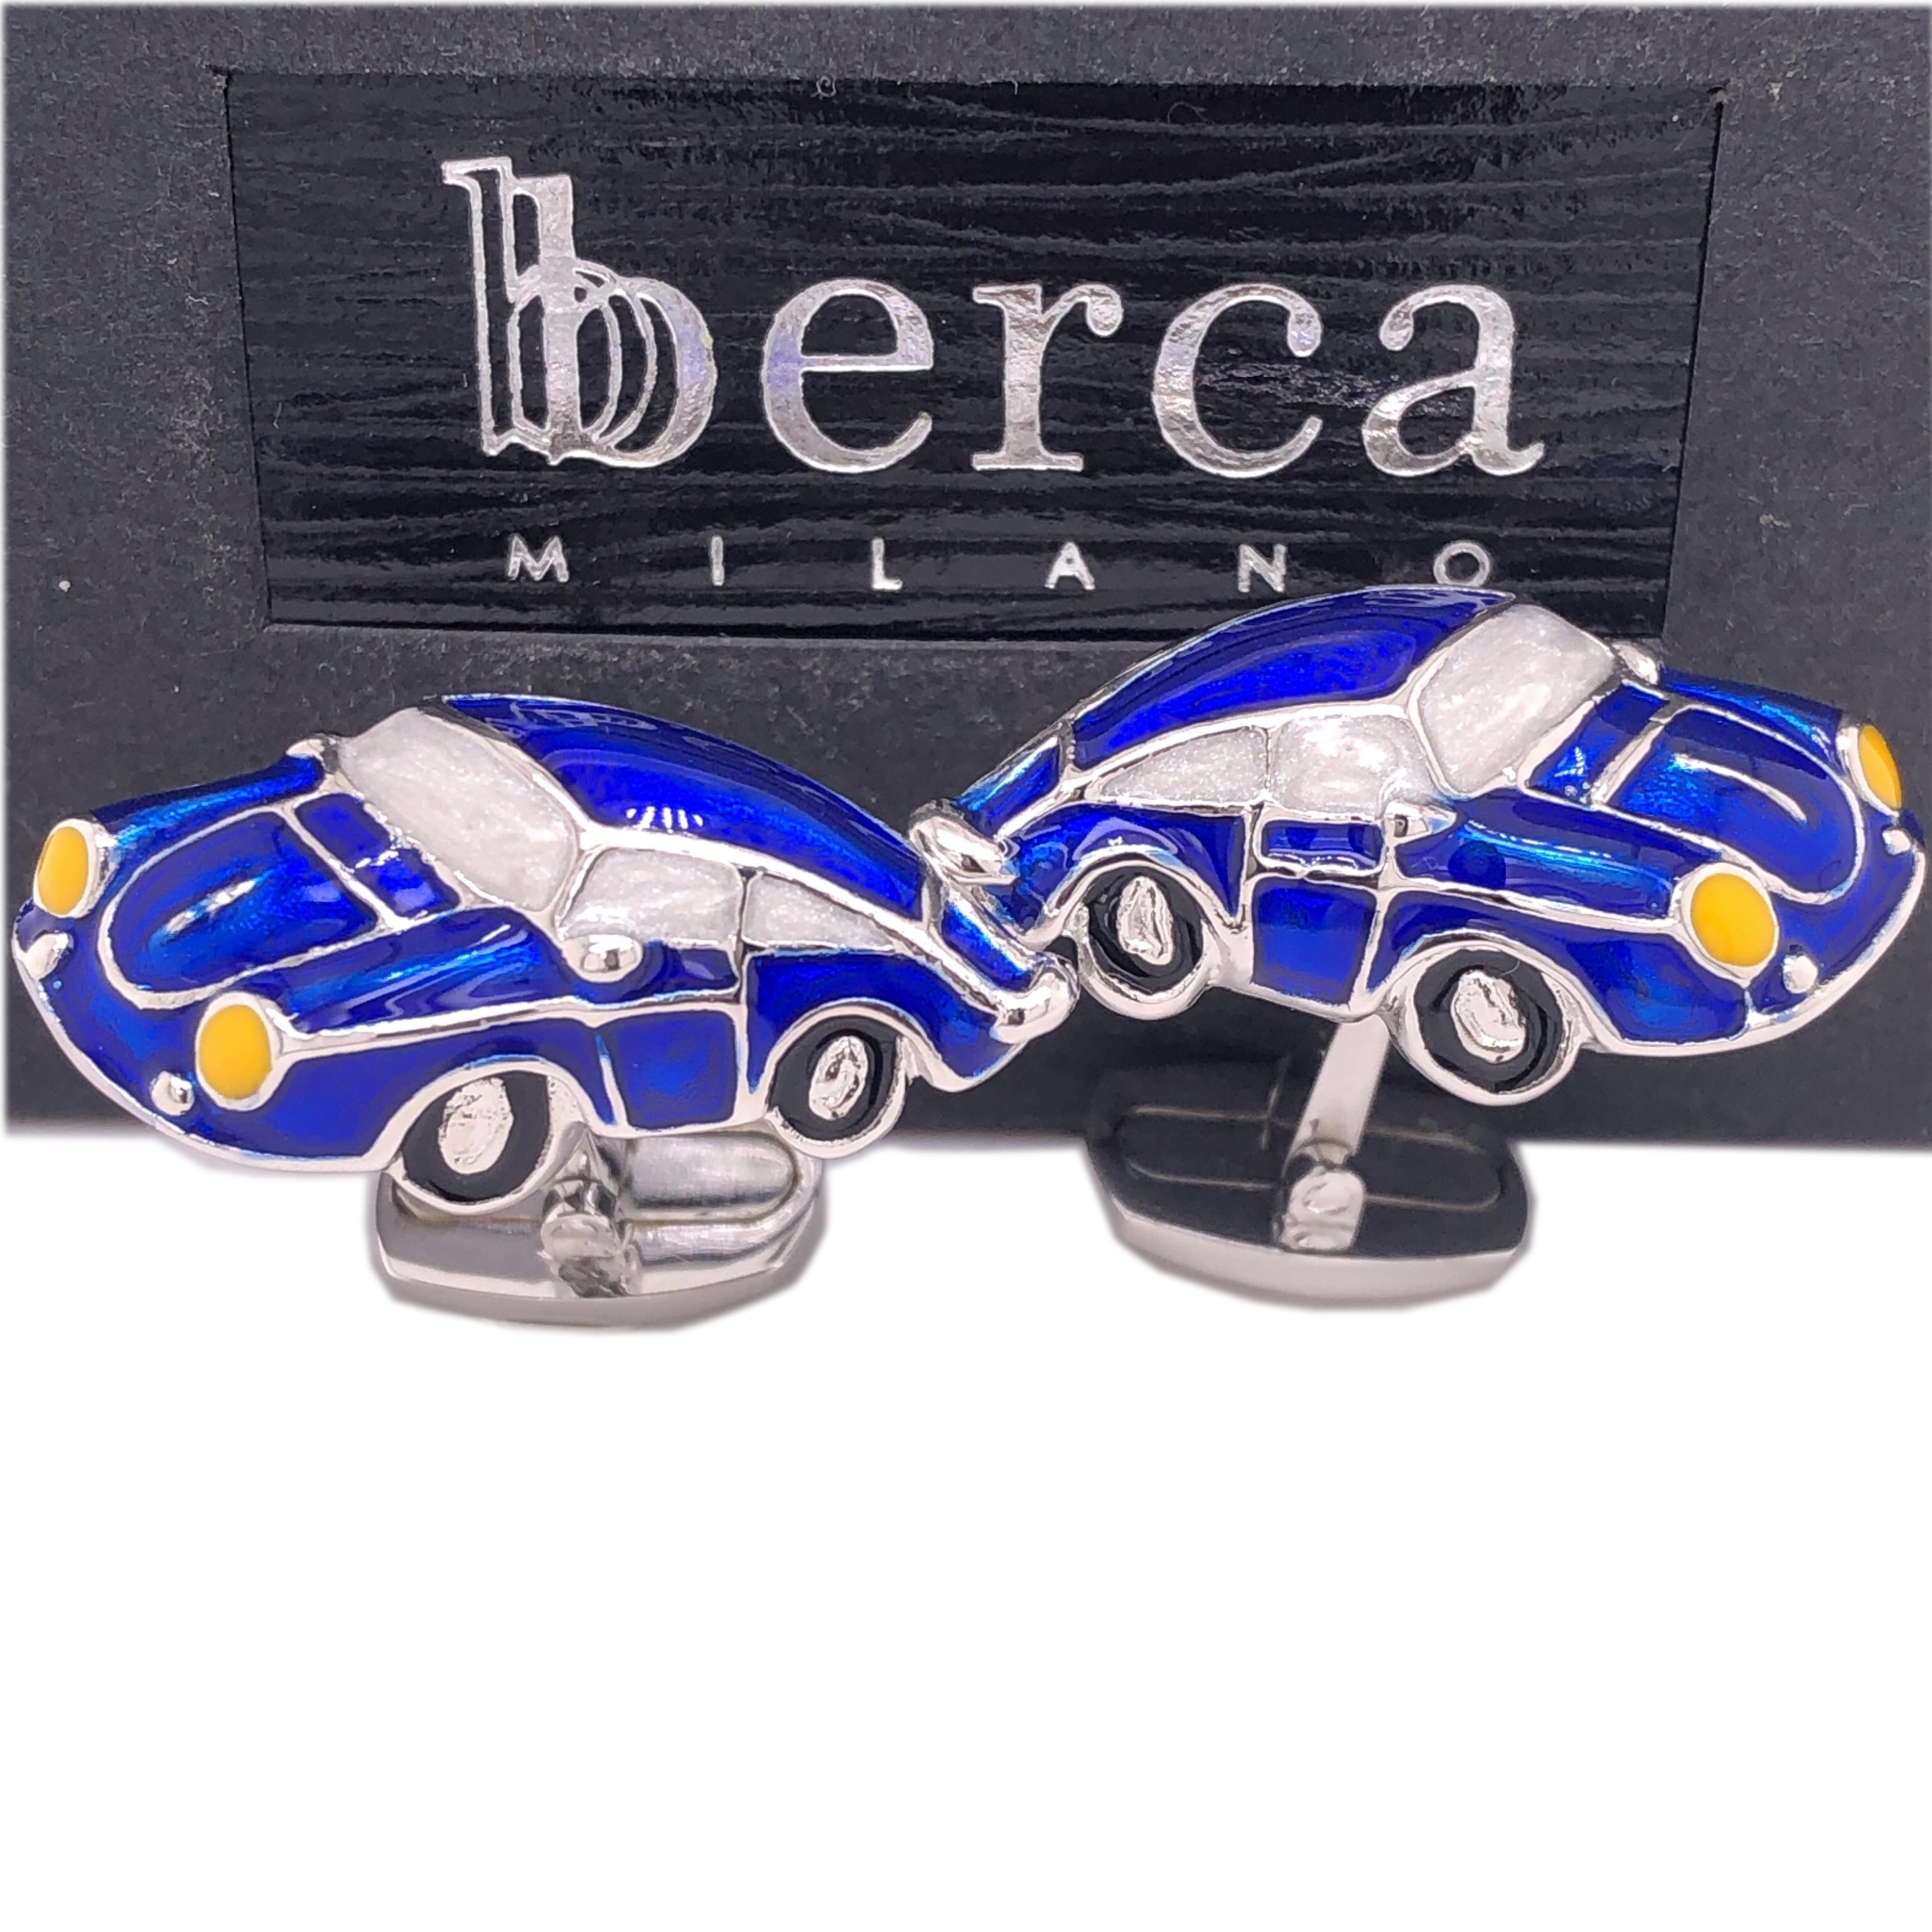 Chic Navy Blue 911 Porsche Shaped T-Bar Back Hand Enameled Sterling Silver Unique Cufflinks.

In our smart fitted Tobacco Suede Leather Box and Pouch.

